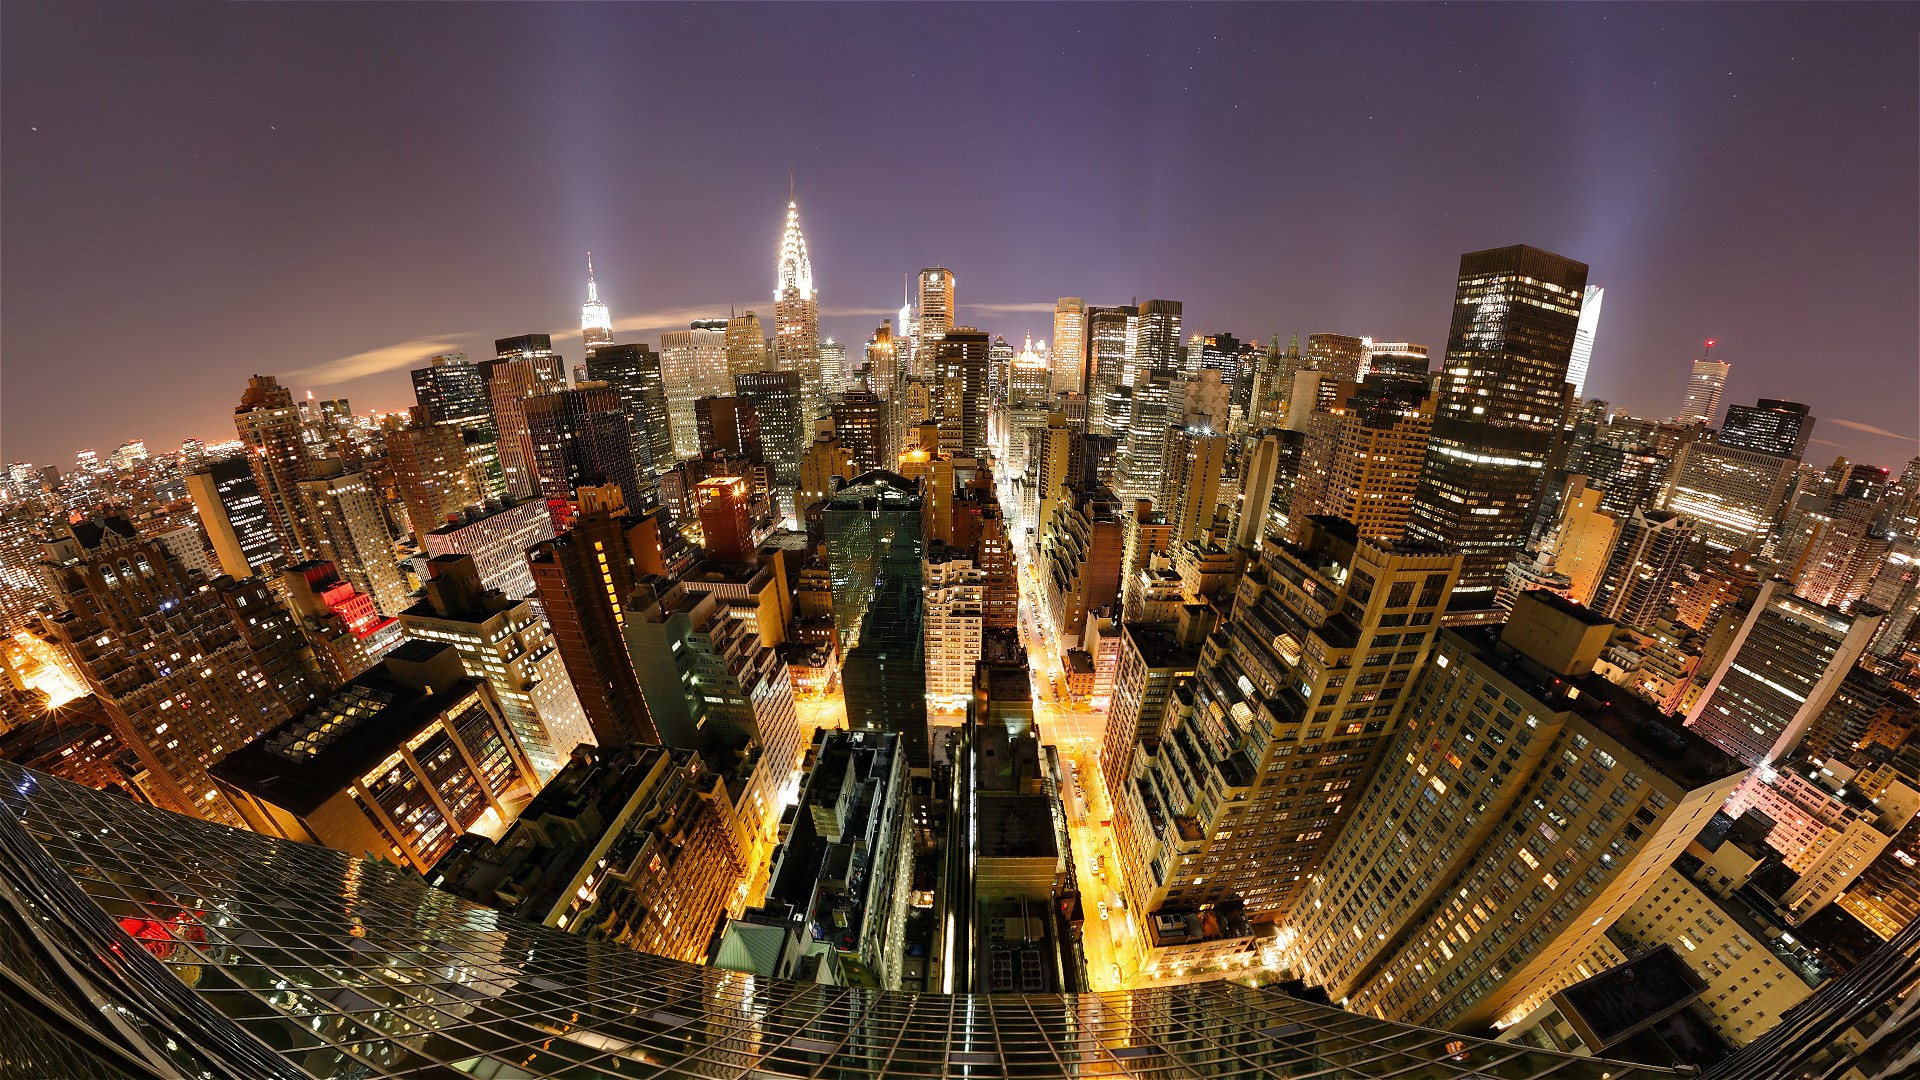  new york city pictures at night wallpaper new york city pictures at